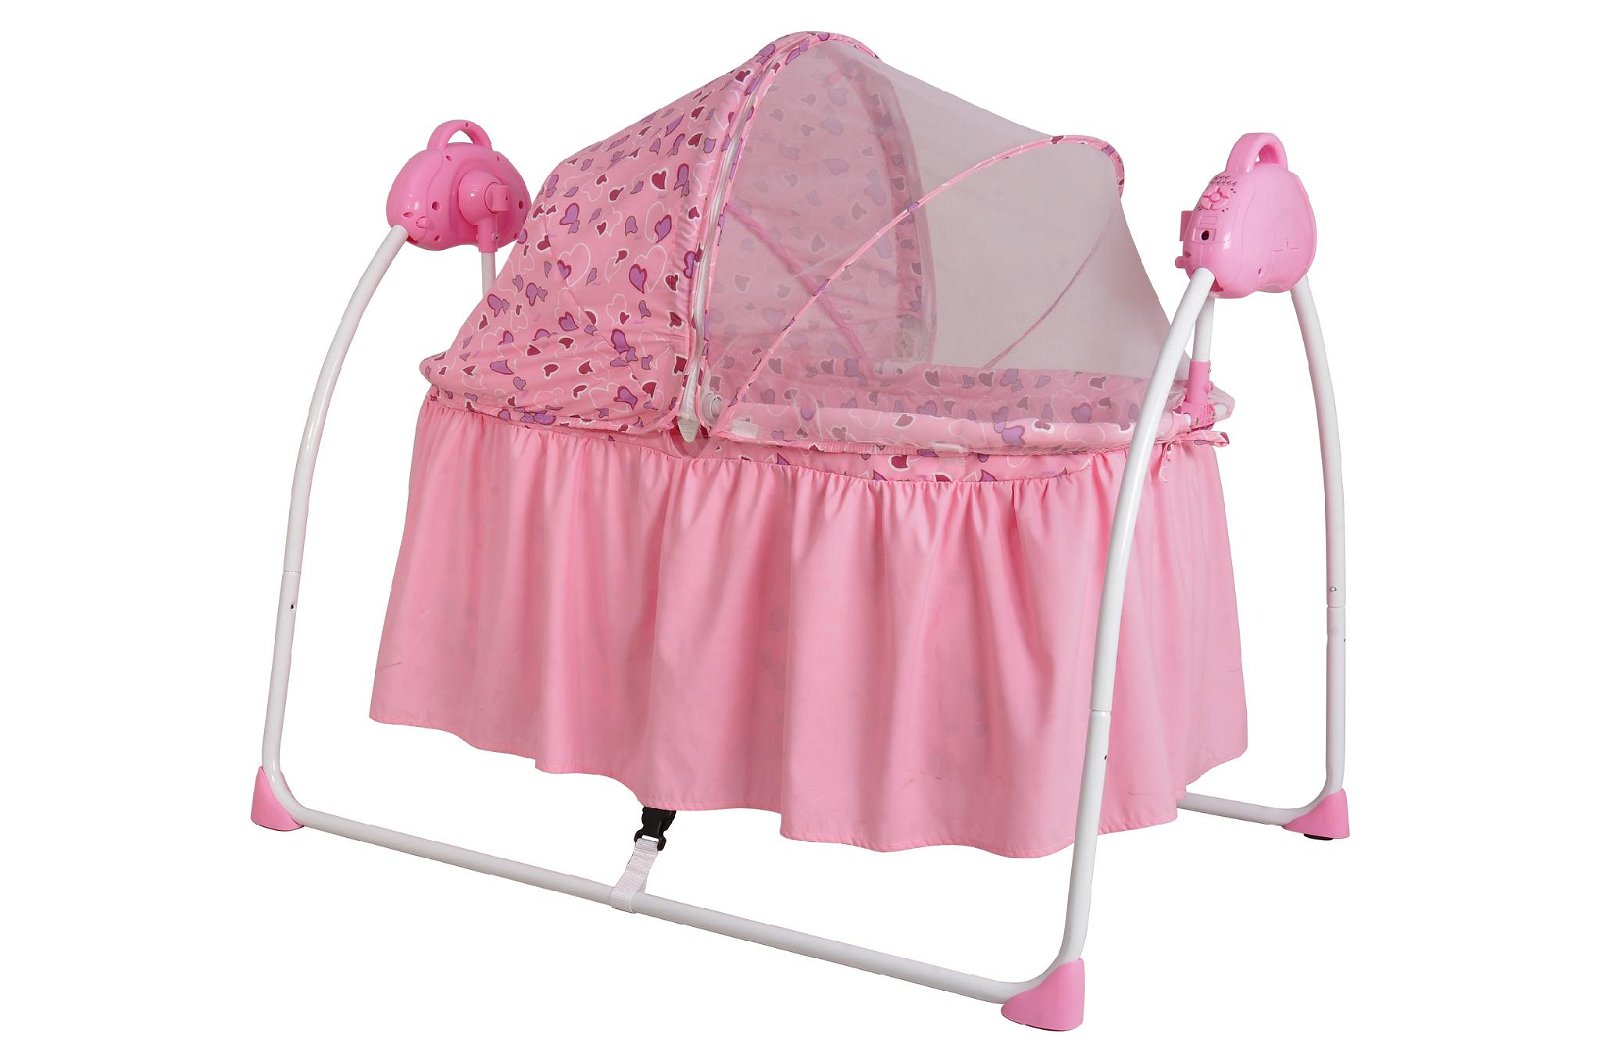 Multi-function baby rocking bed swing cradle with mosquito net 3